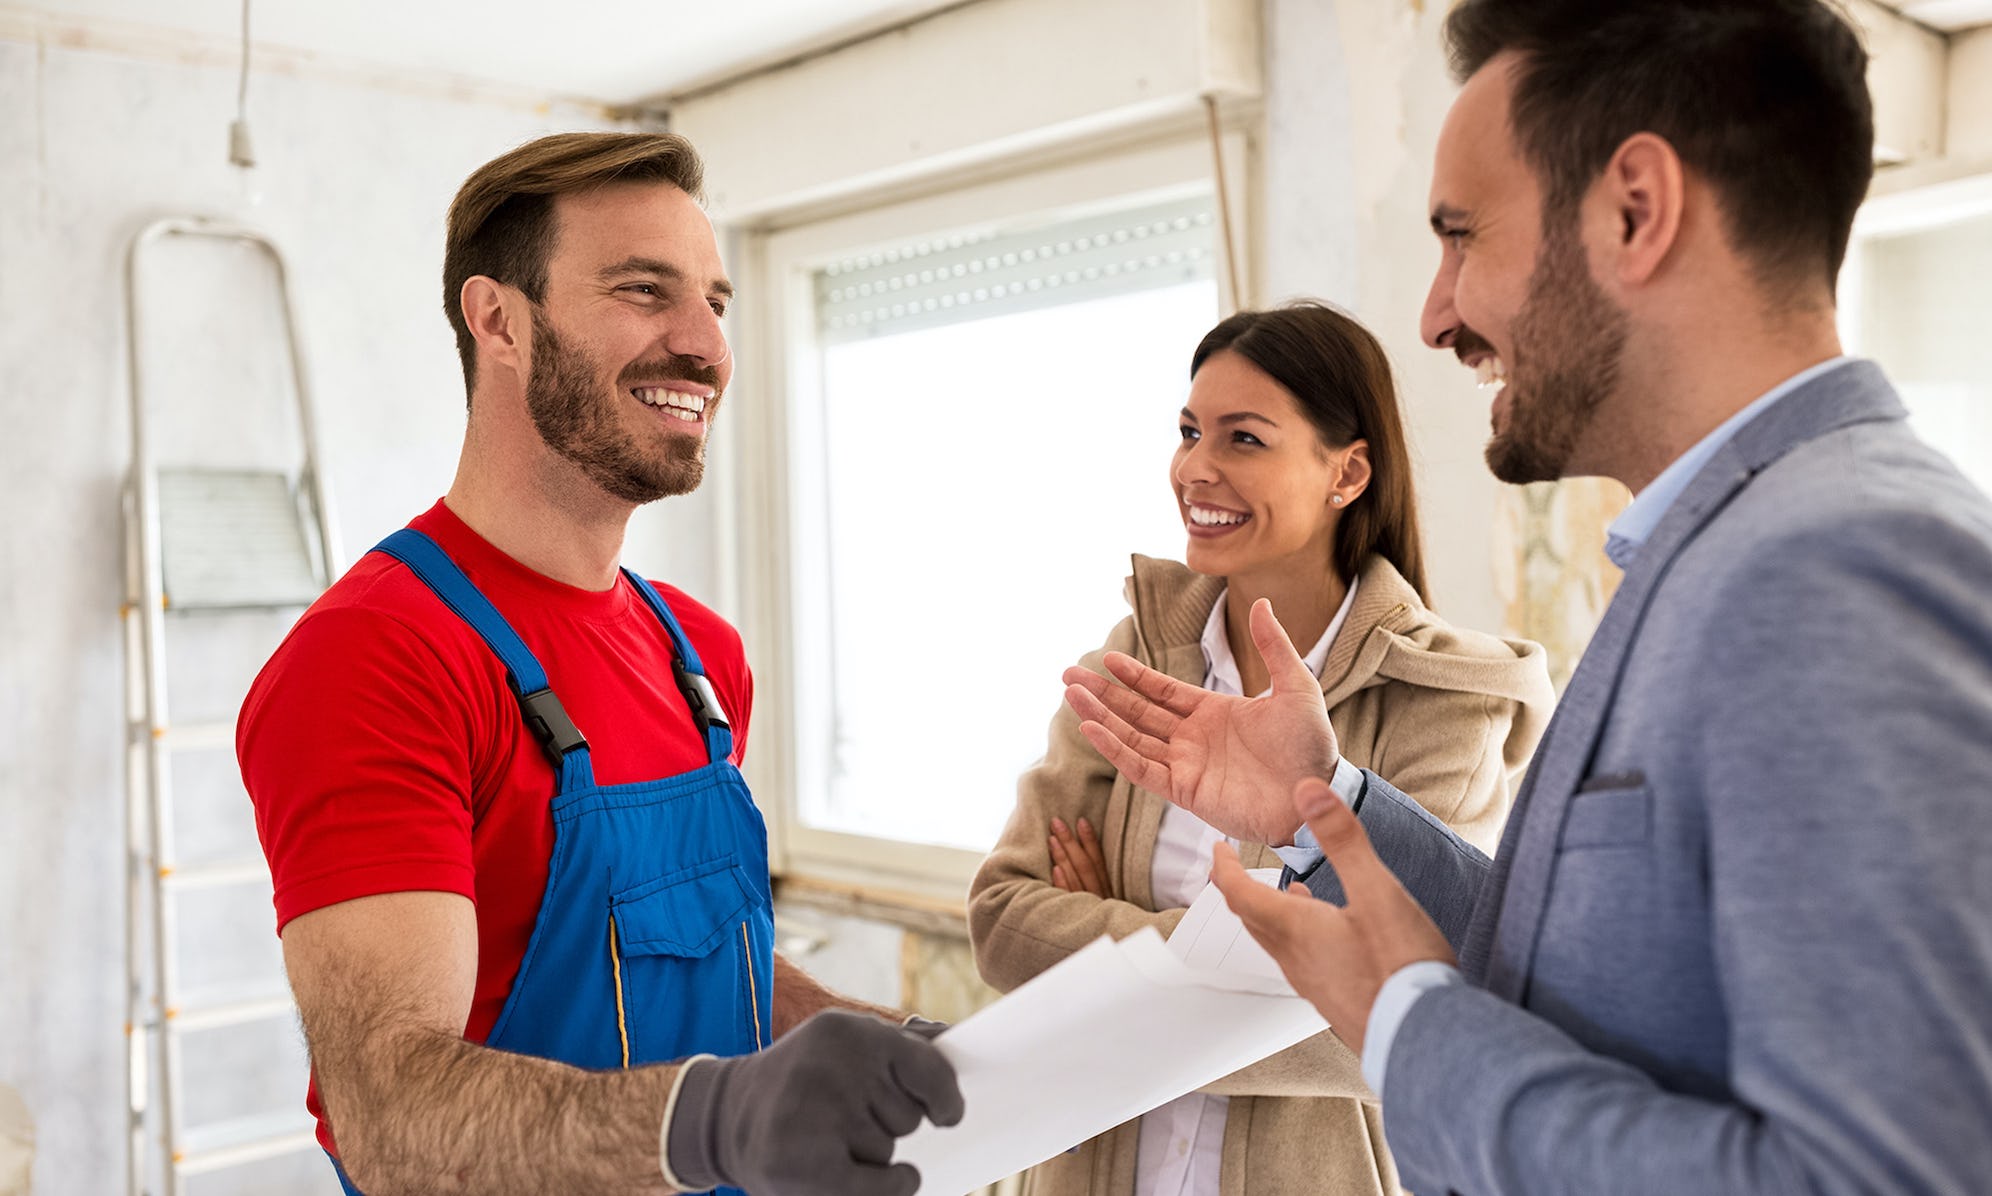 Homeowners discussing repairs and home renovation with a friendly tradesperson, contractor